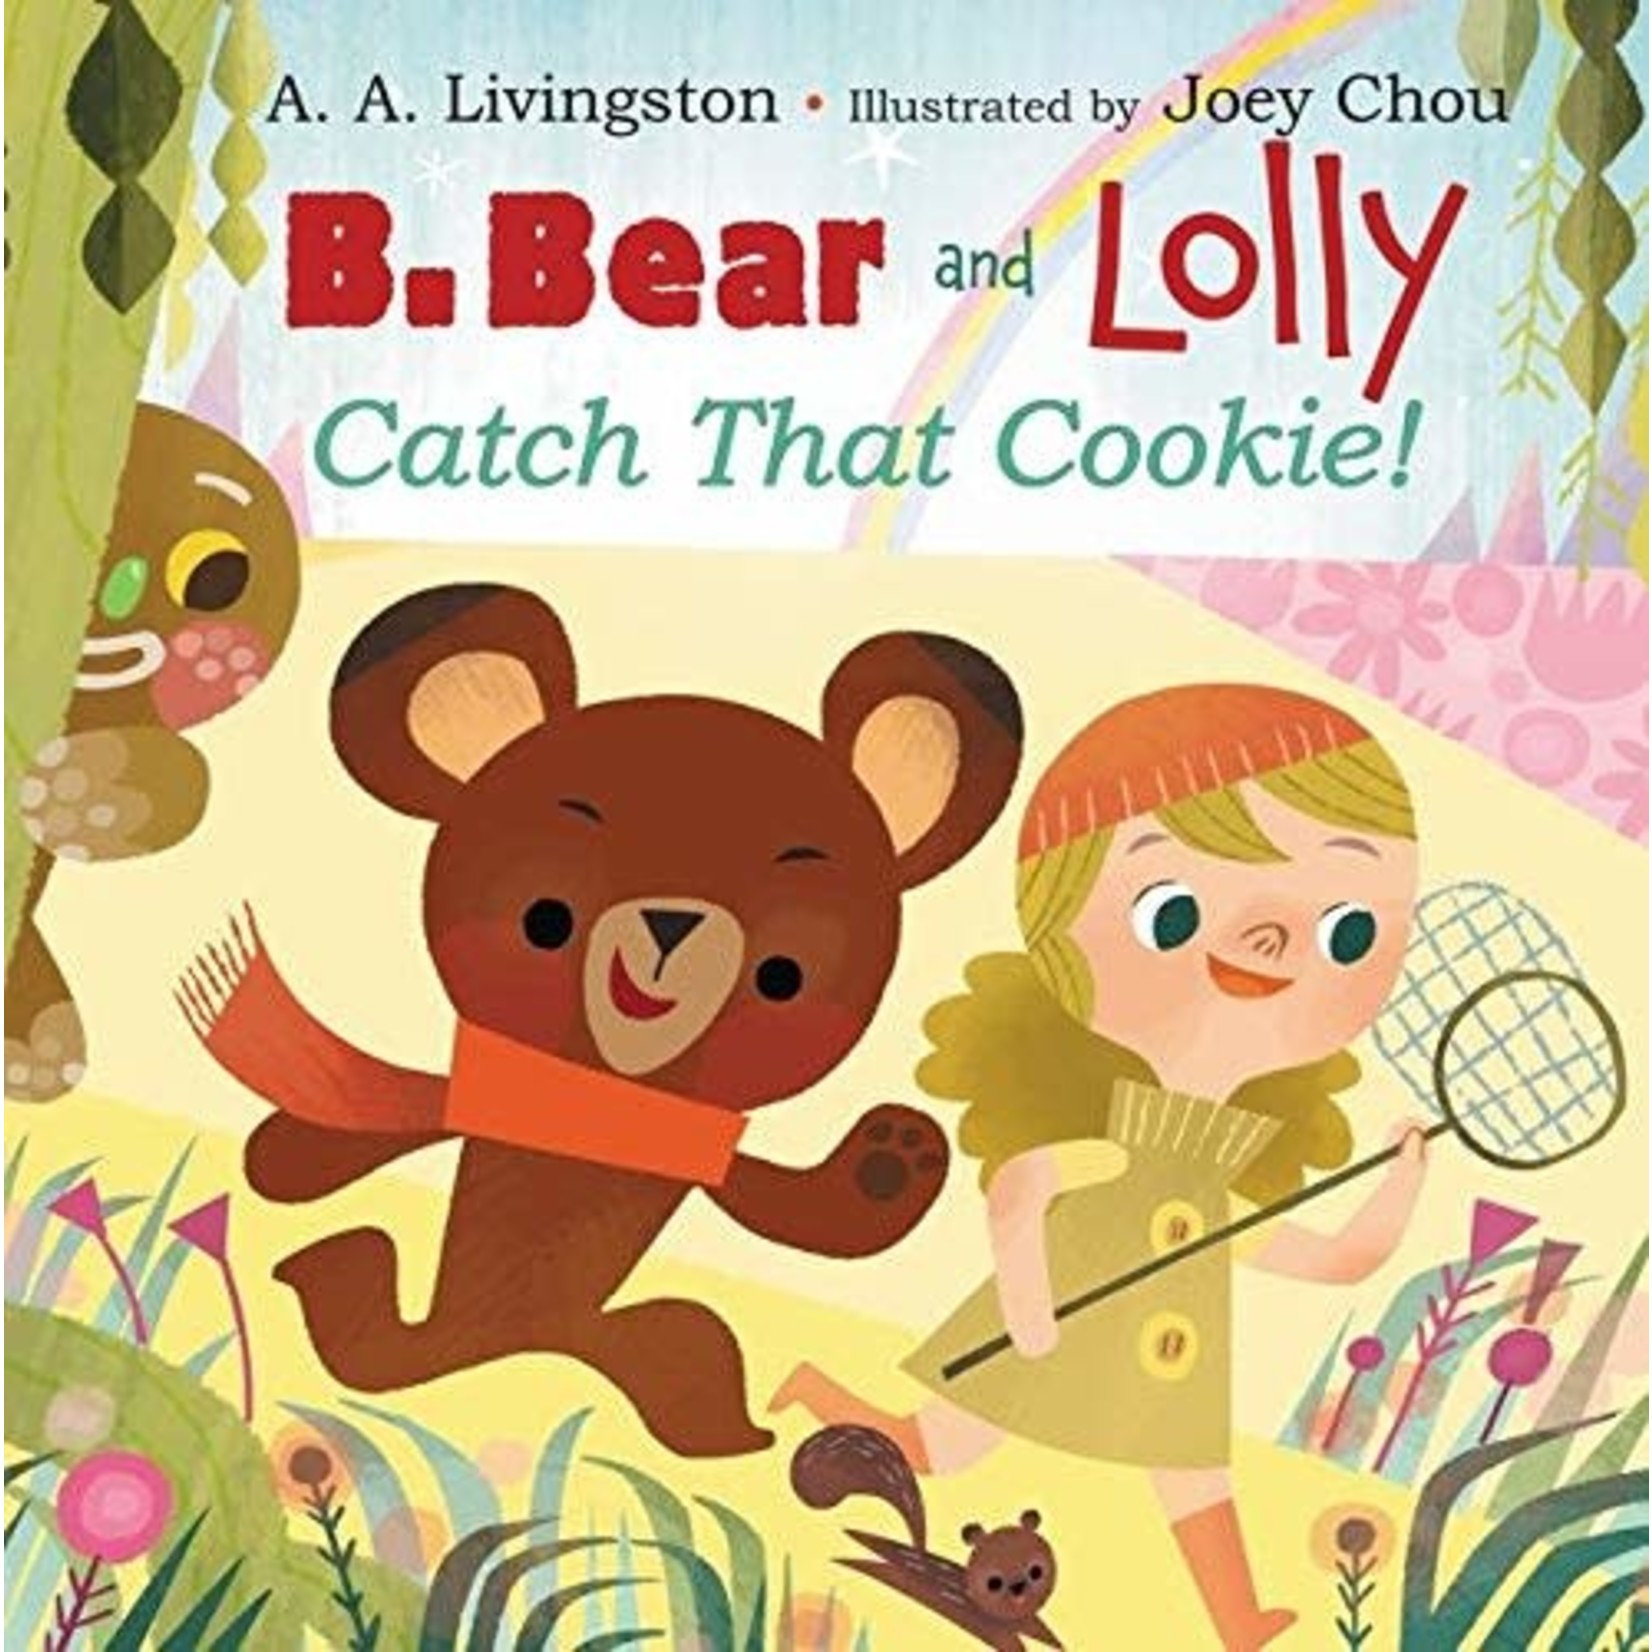 A.A. Livingston B.Bear and Lolly Catch That Cookie